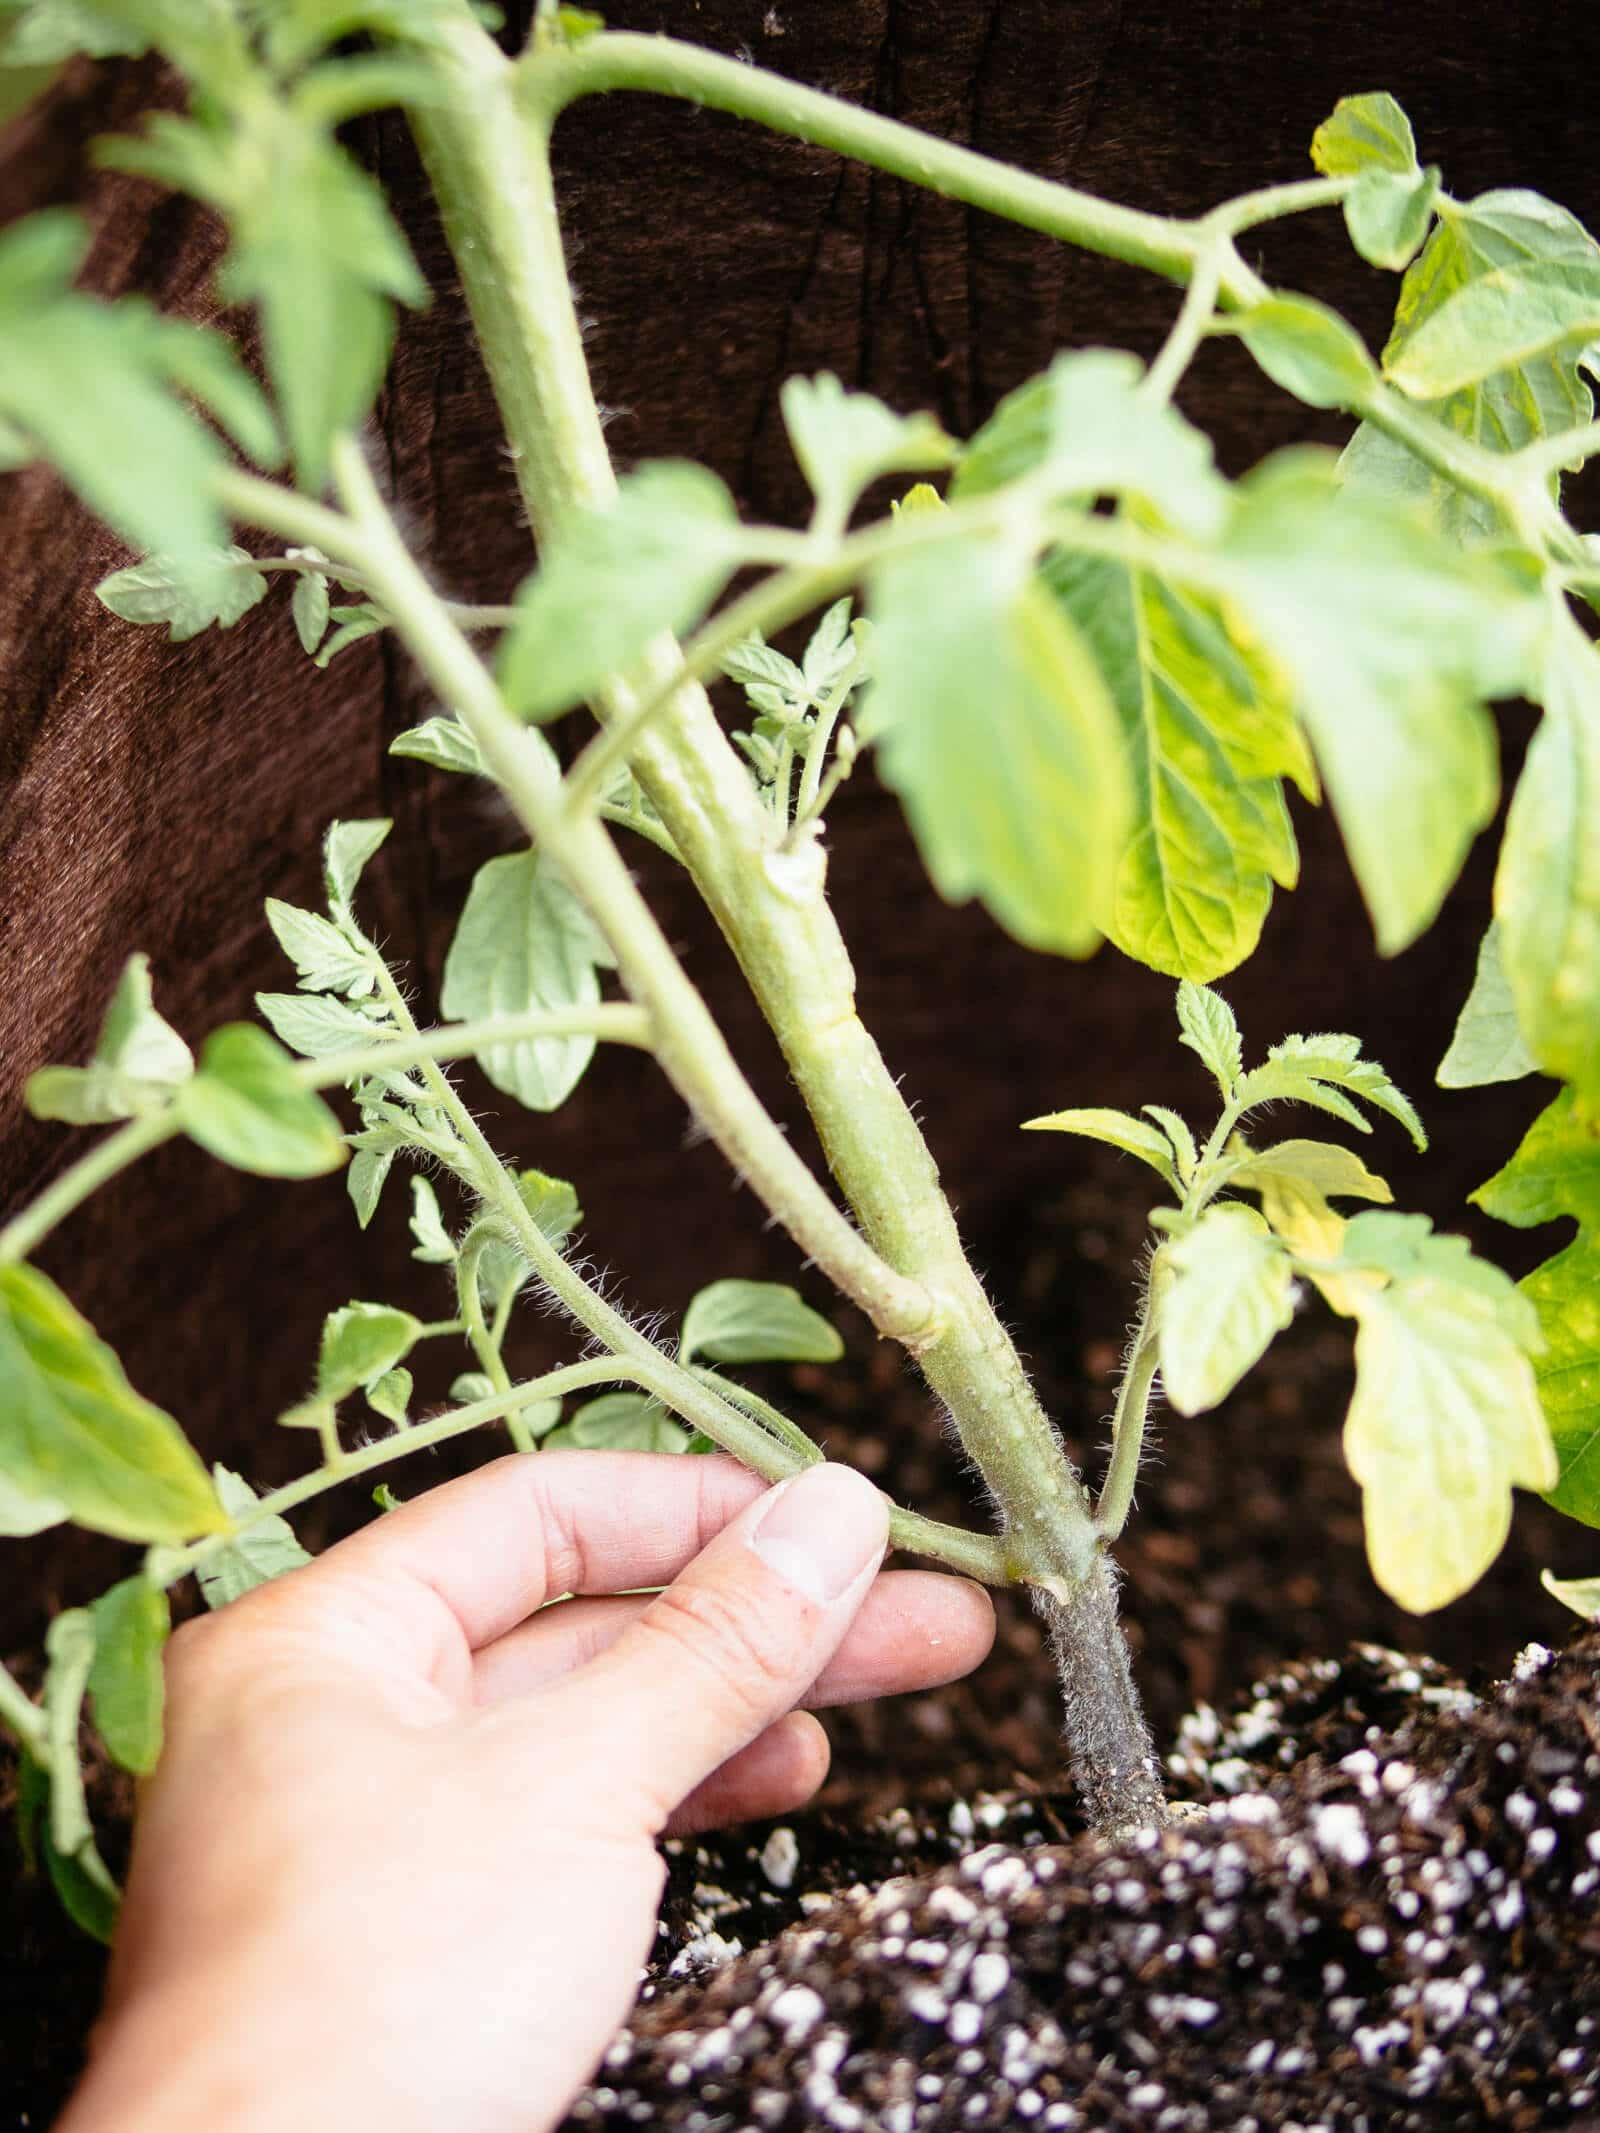 Trim off the lowest sets of leaves and bury the stem of the tomato plant